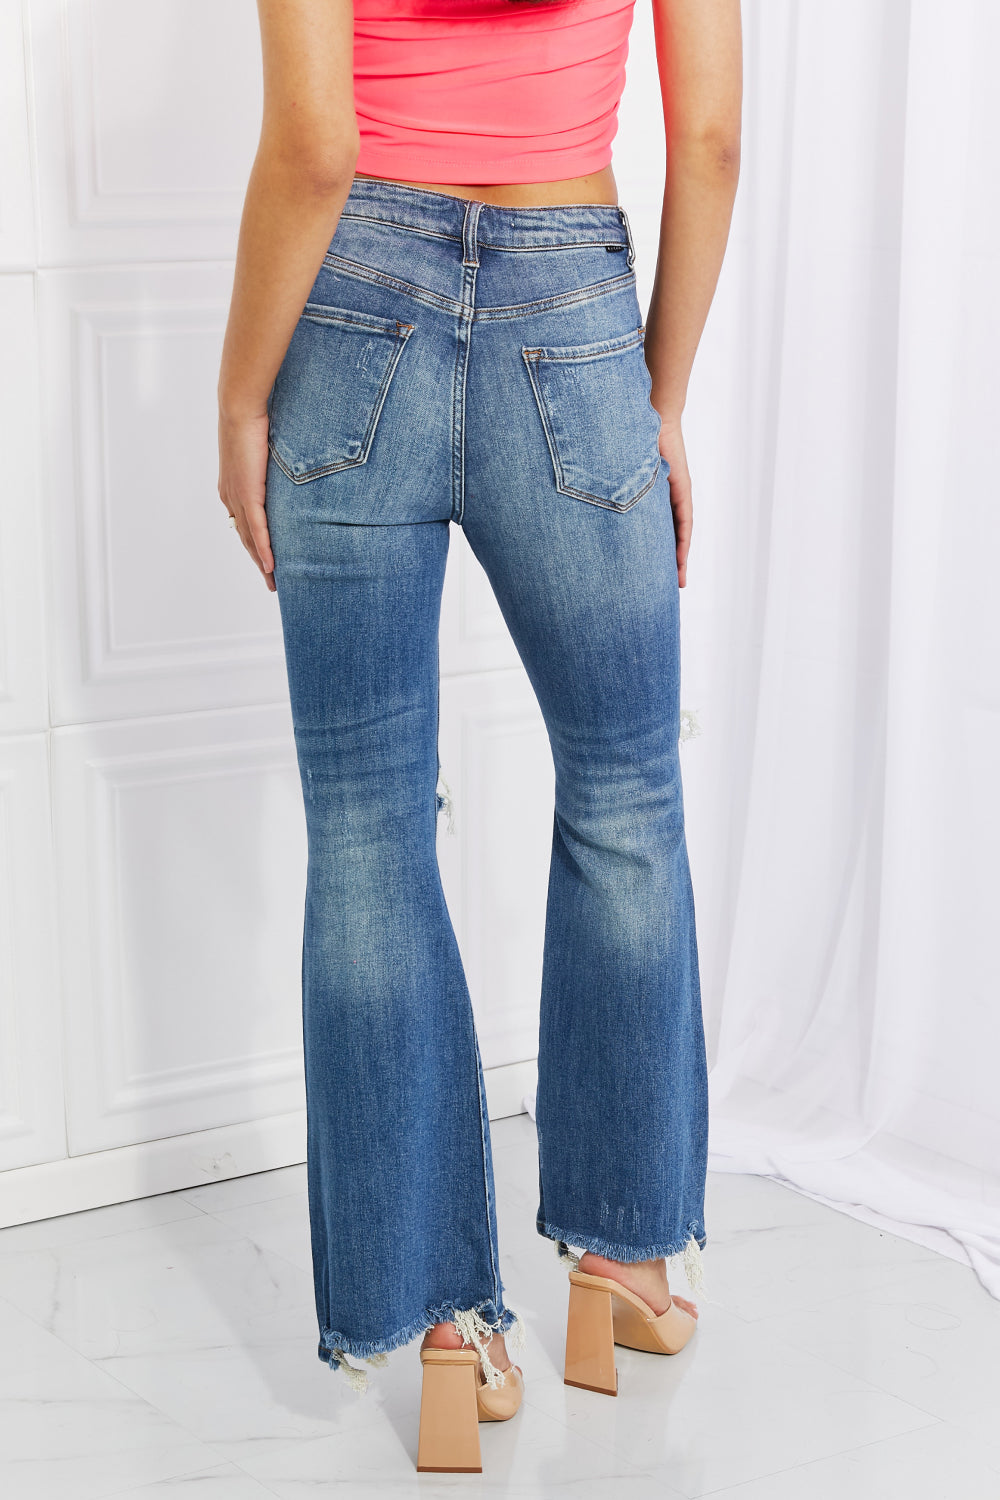 RISEN Full Size Hazel High Rise Distressed Flare Jeans COCO CRESS